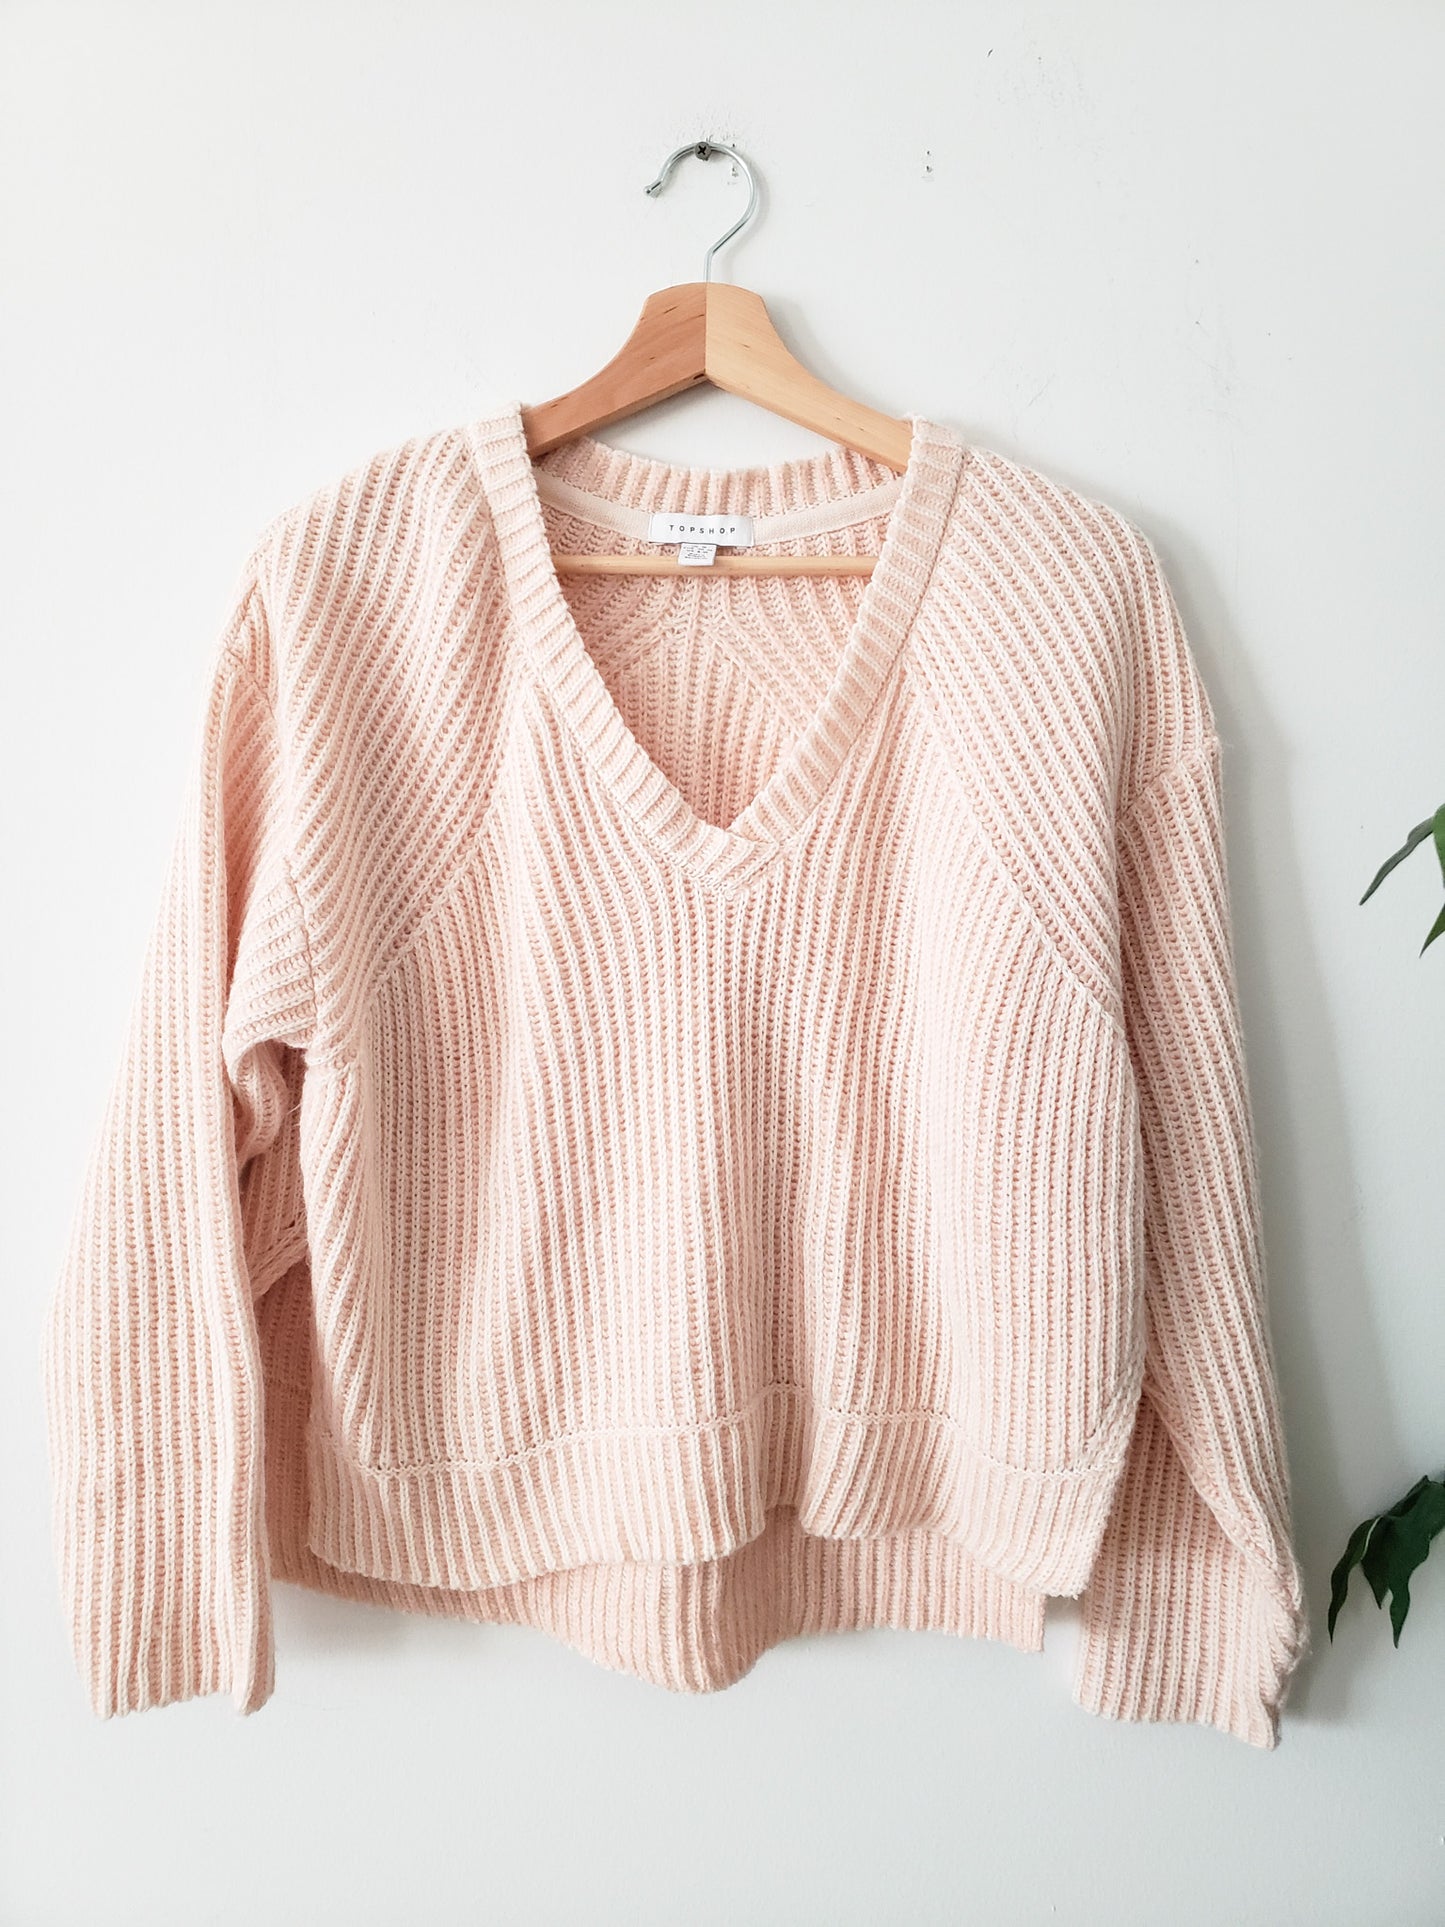 TOPSHOP PINK AND WHITE STRIPE CROPPED SWEATER SIZE MEDIUM